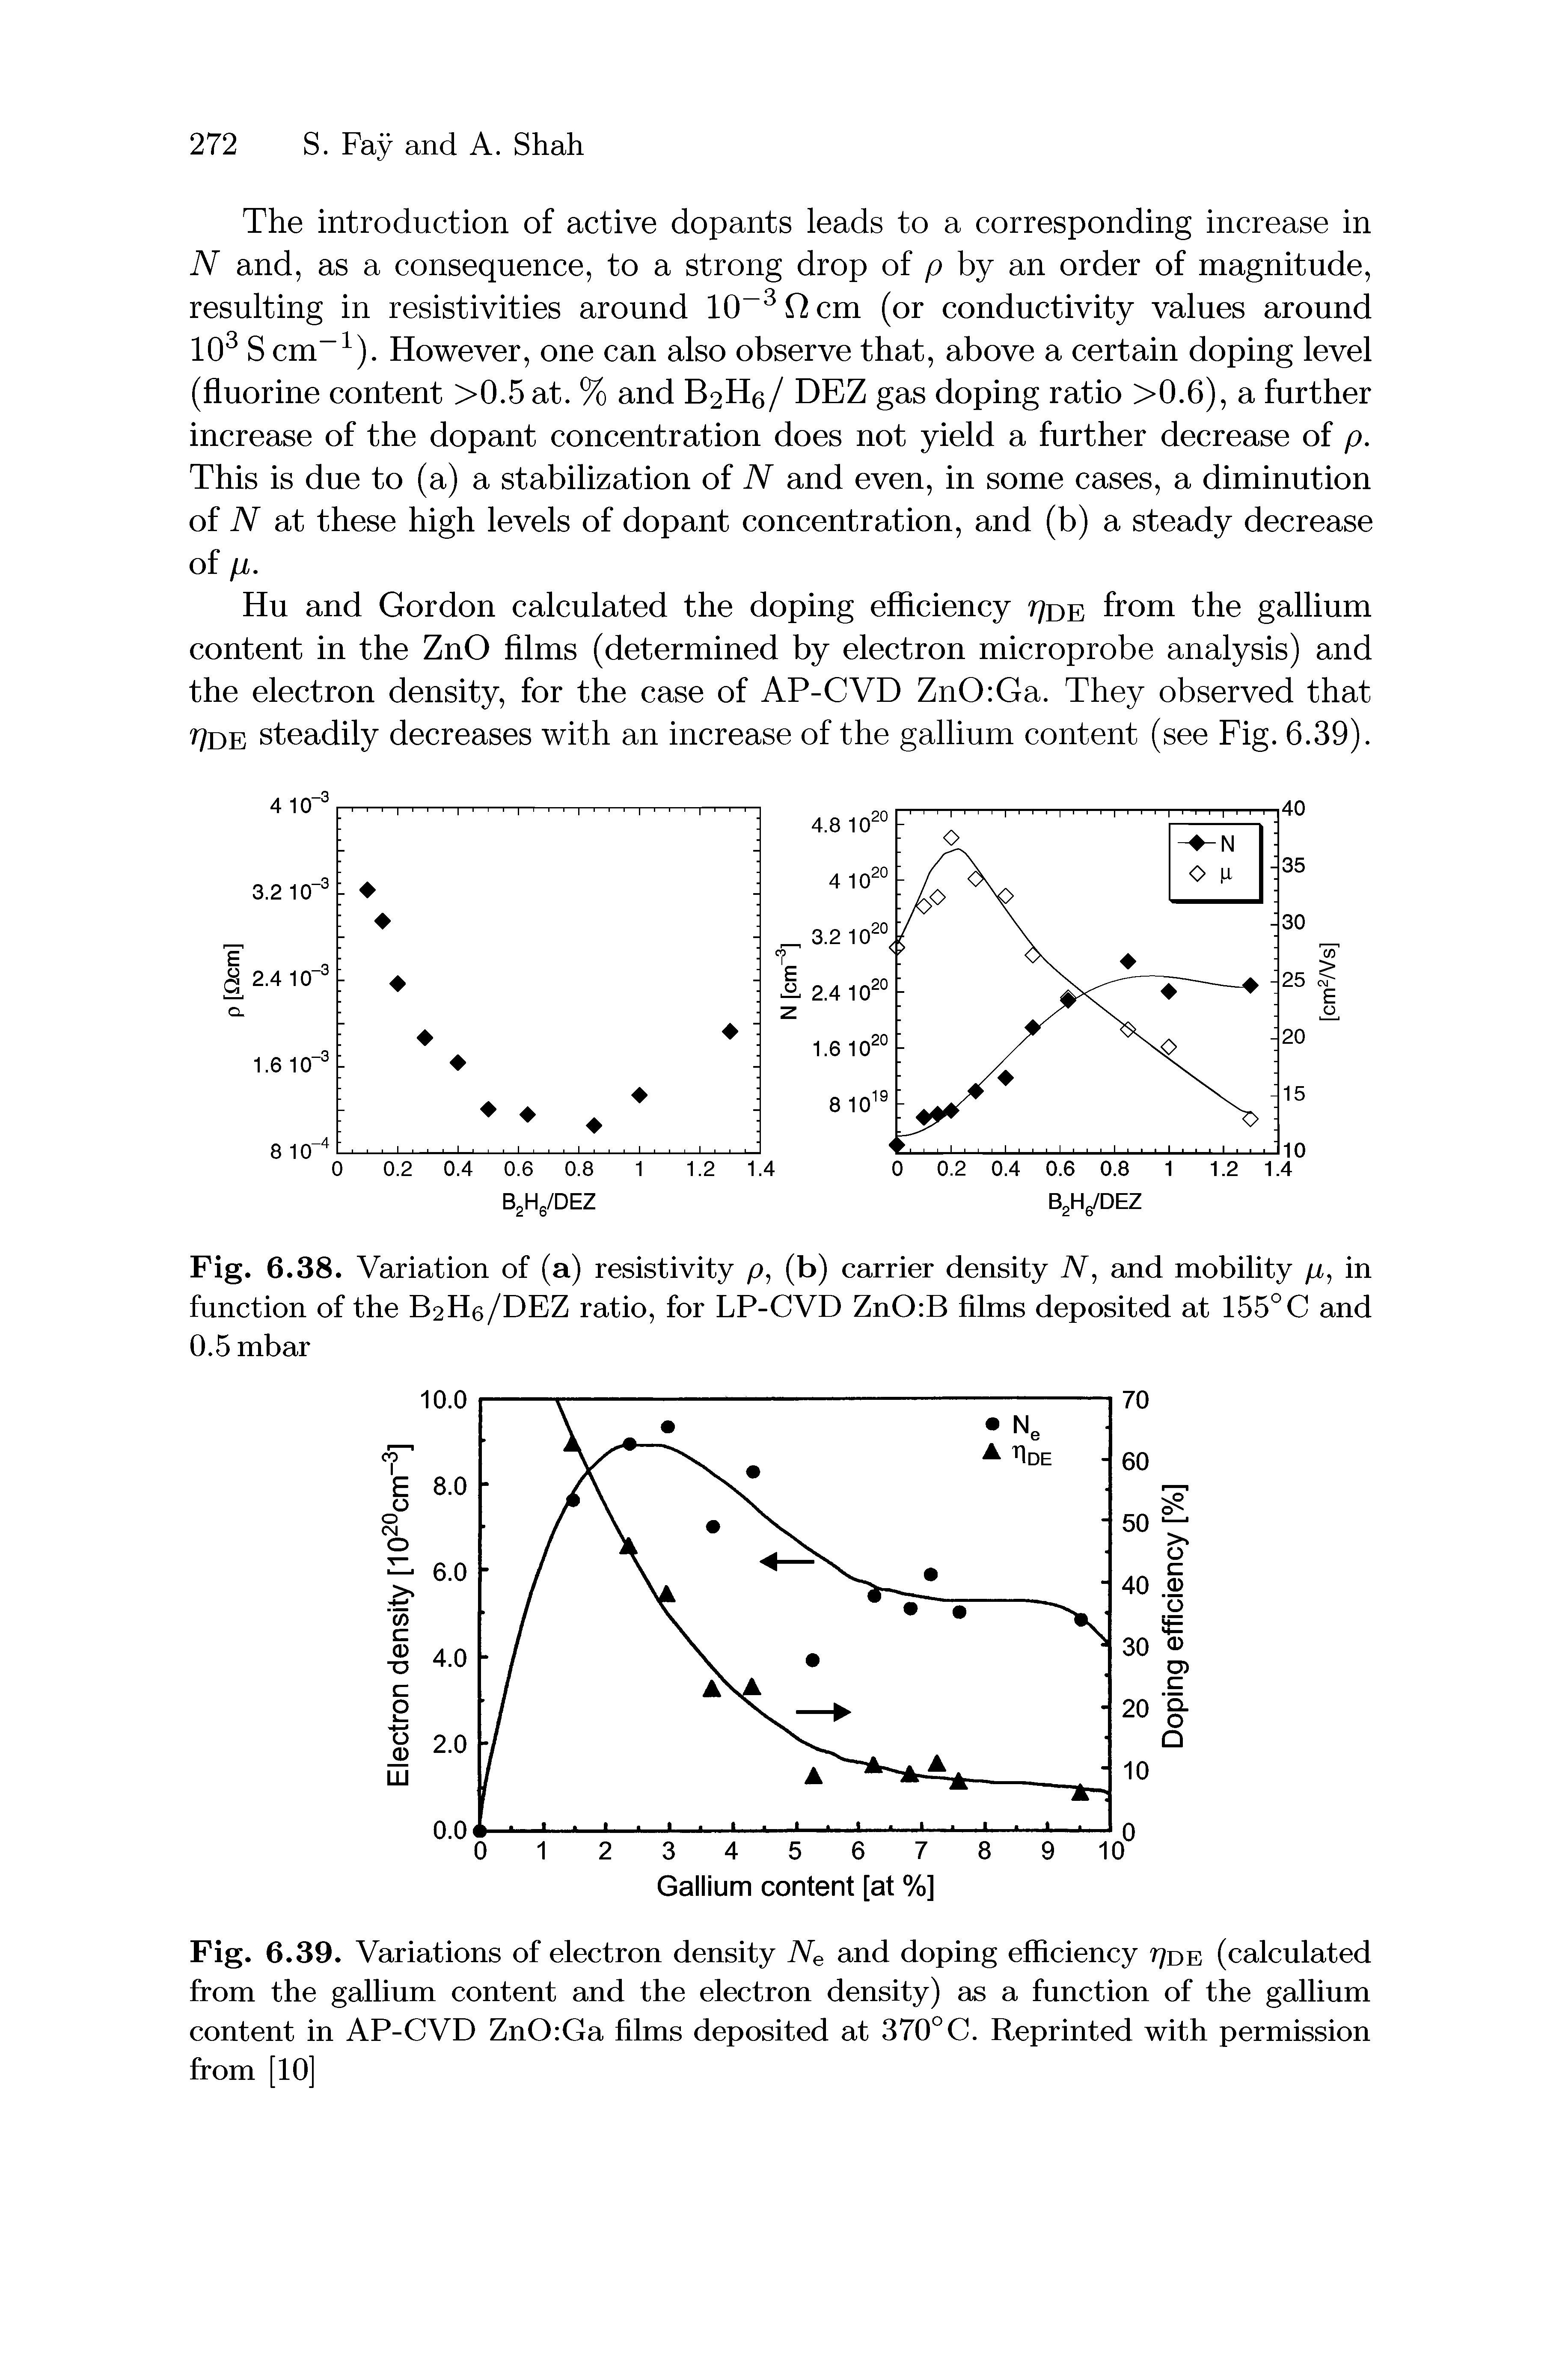 Fig. 6.39. Variations of electron density TVe and doping efficiency 77de (calculated from the gallium content and the electron density) as a function of the gallium content in AP-CVD ZnO Ga films deposited at 370°C. Reprinted with permission from [10]...